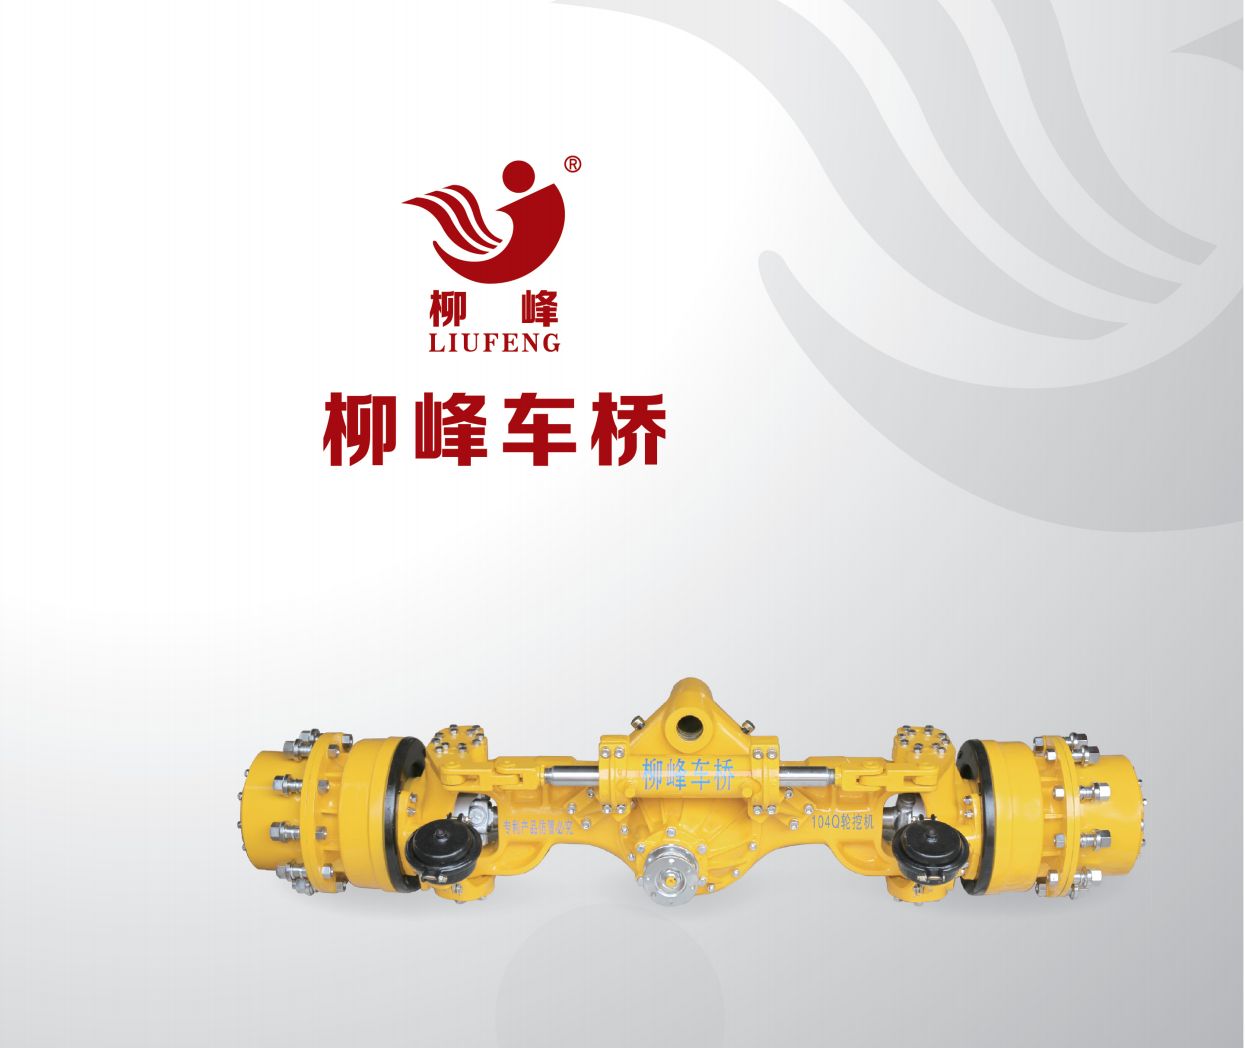 Liufeng Axle, a professional manufacturer of wheeled excavators and agricultural machinery drive axles in China